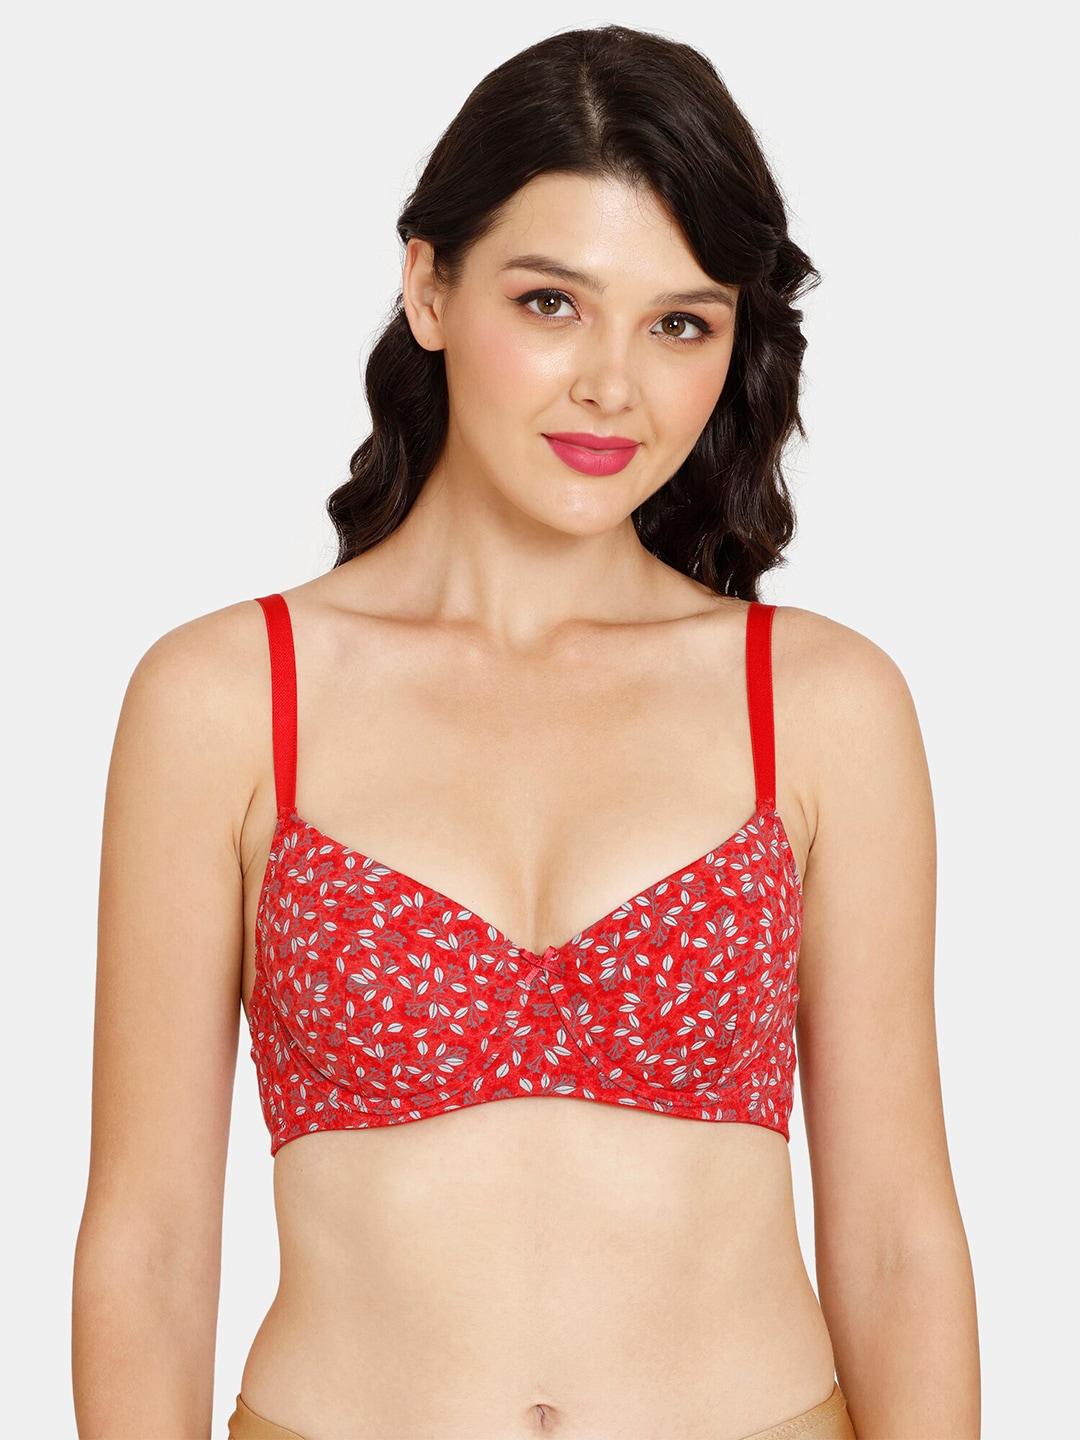 rosaline-by-zivame-red-&-white-floral-bra-underwired-lightly-padded